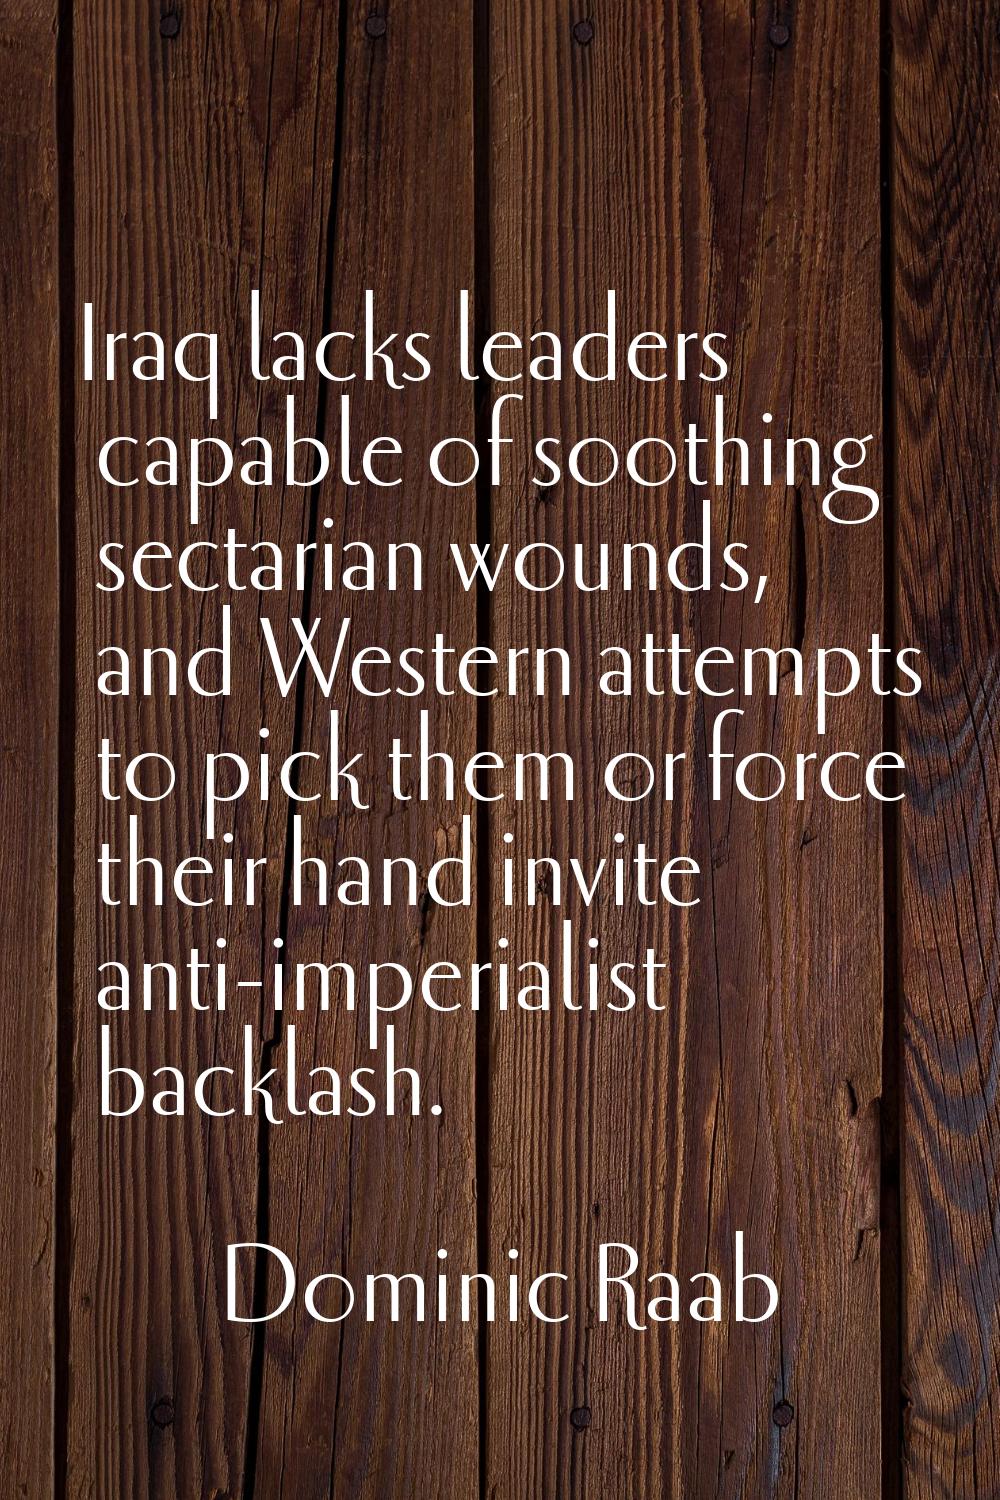 Iraq lacks leaders capable of soothing sectarian wounds, and Western attempts to pick them or force